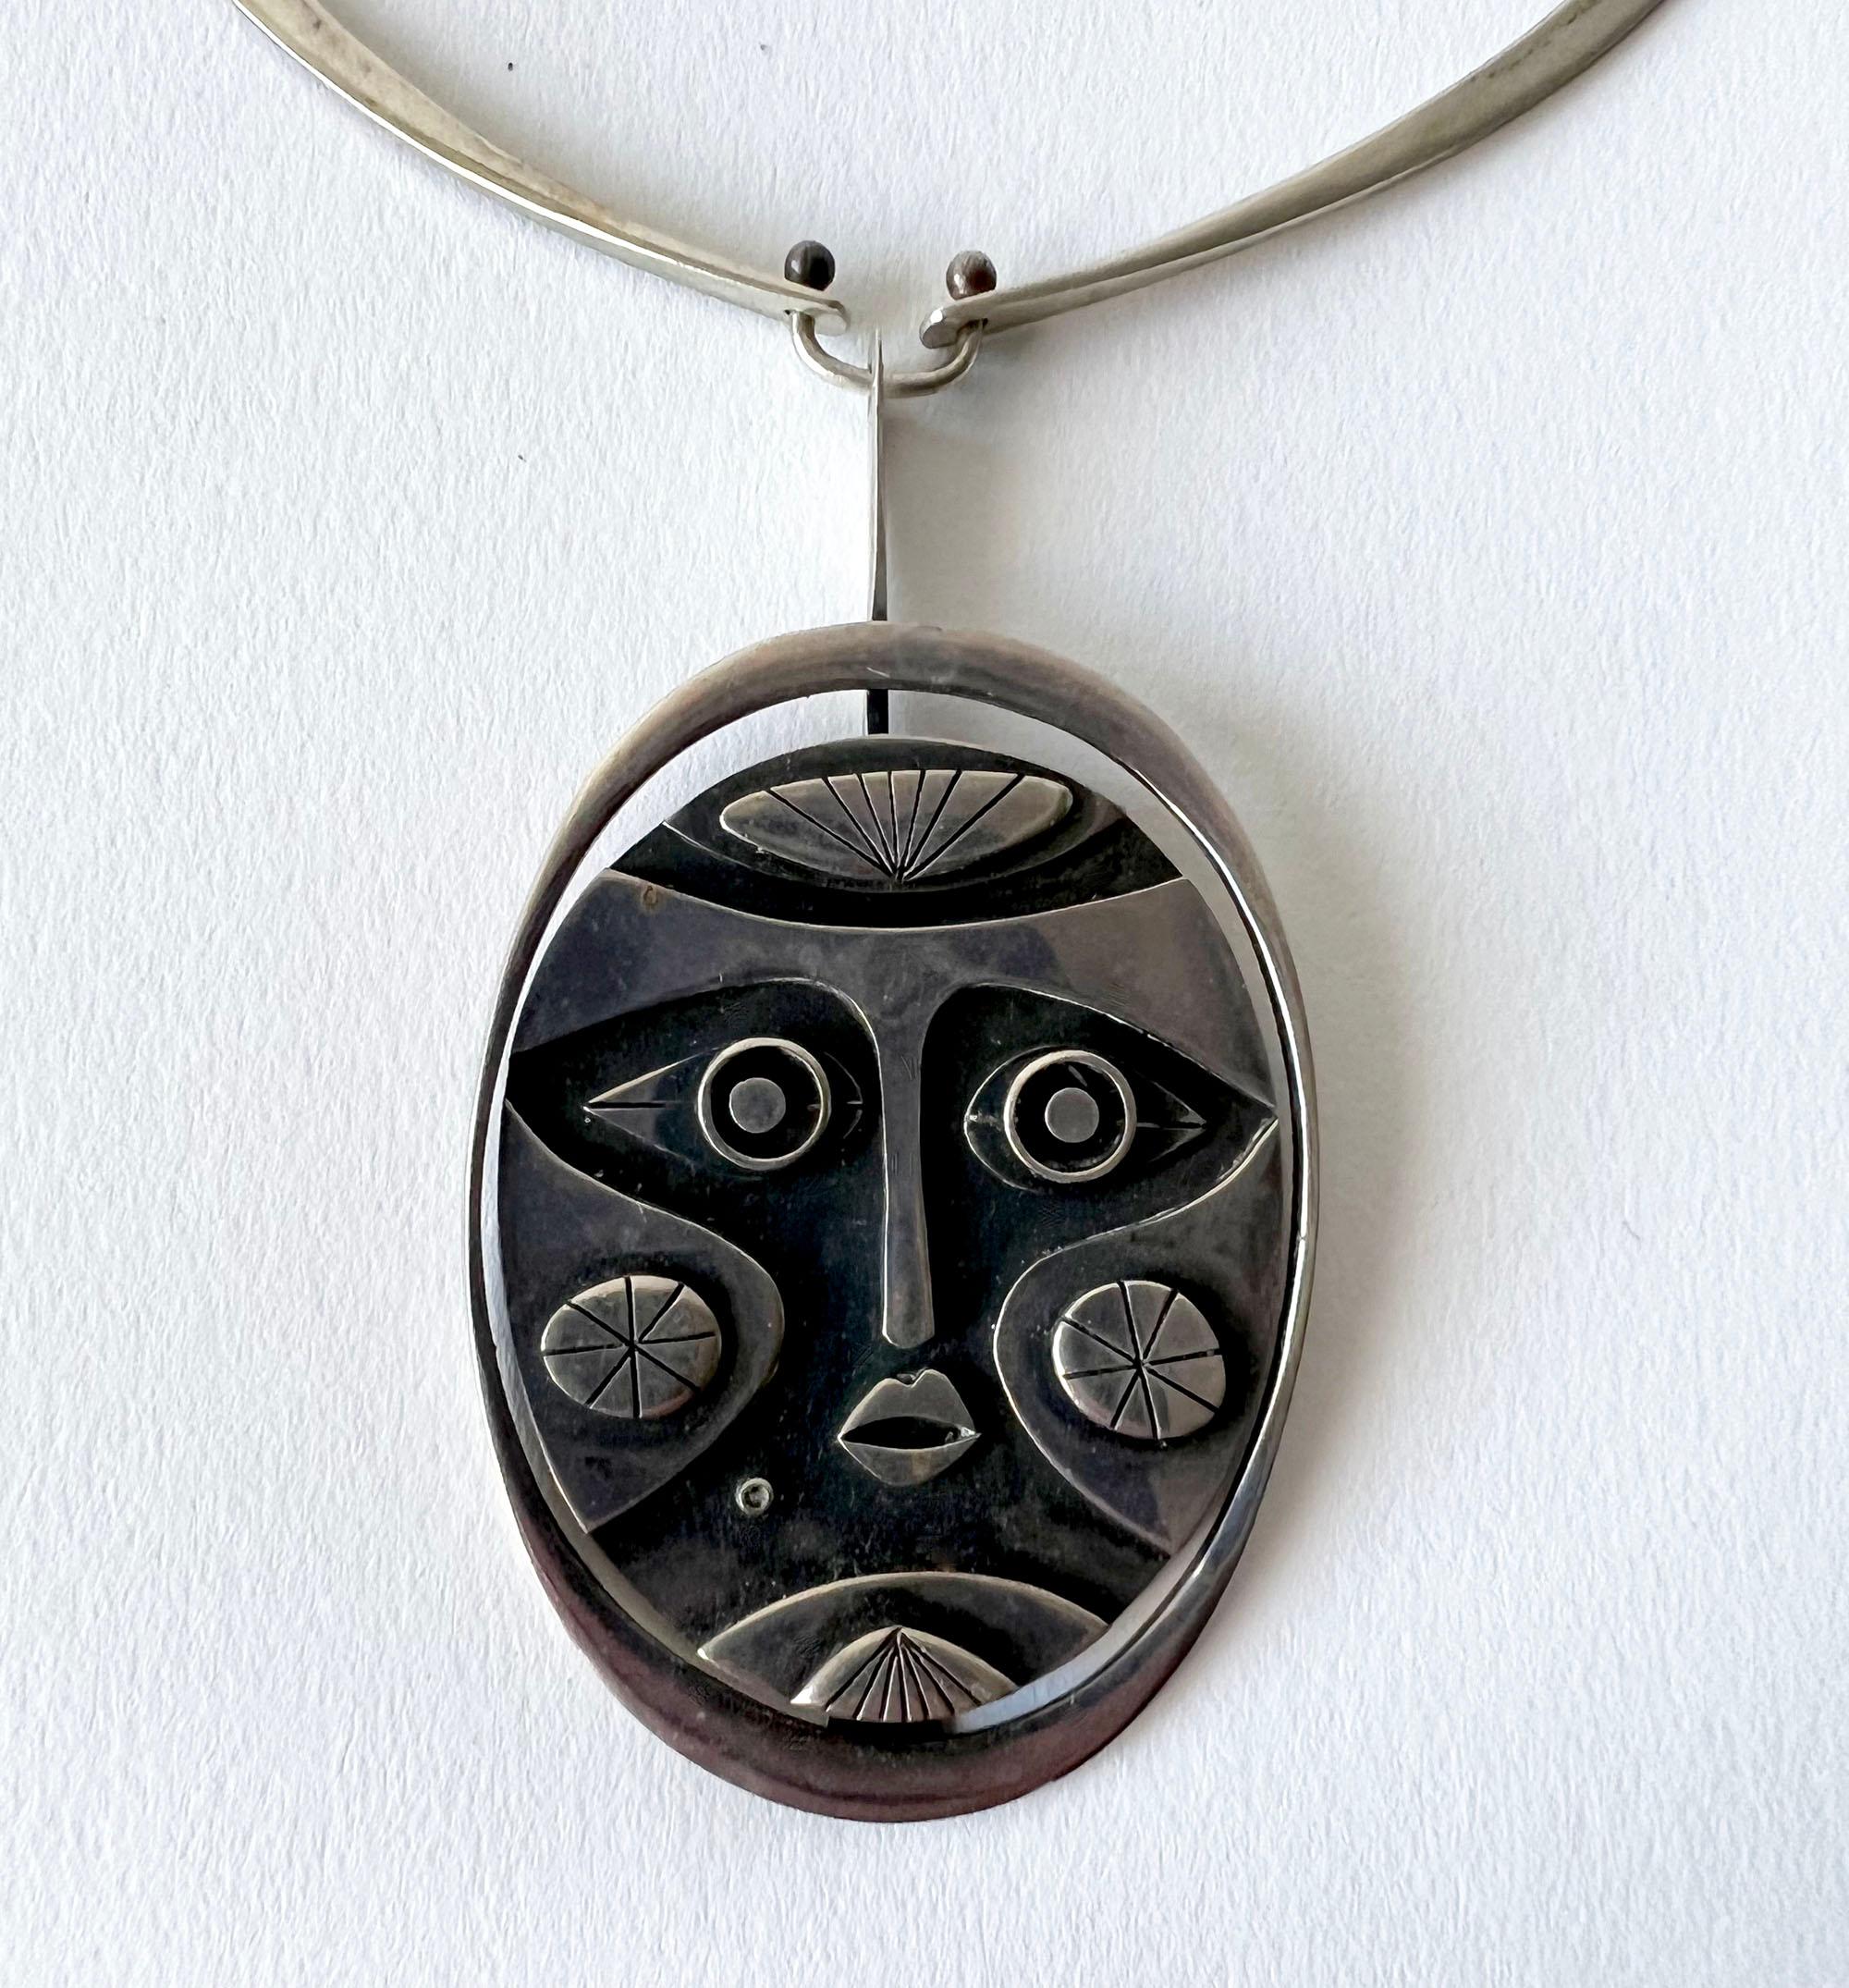 Sterling silver mask pendant necklace created by Jack Boyd of San Diego, California.  Necklace portion measures about 17.5